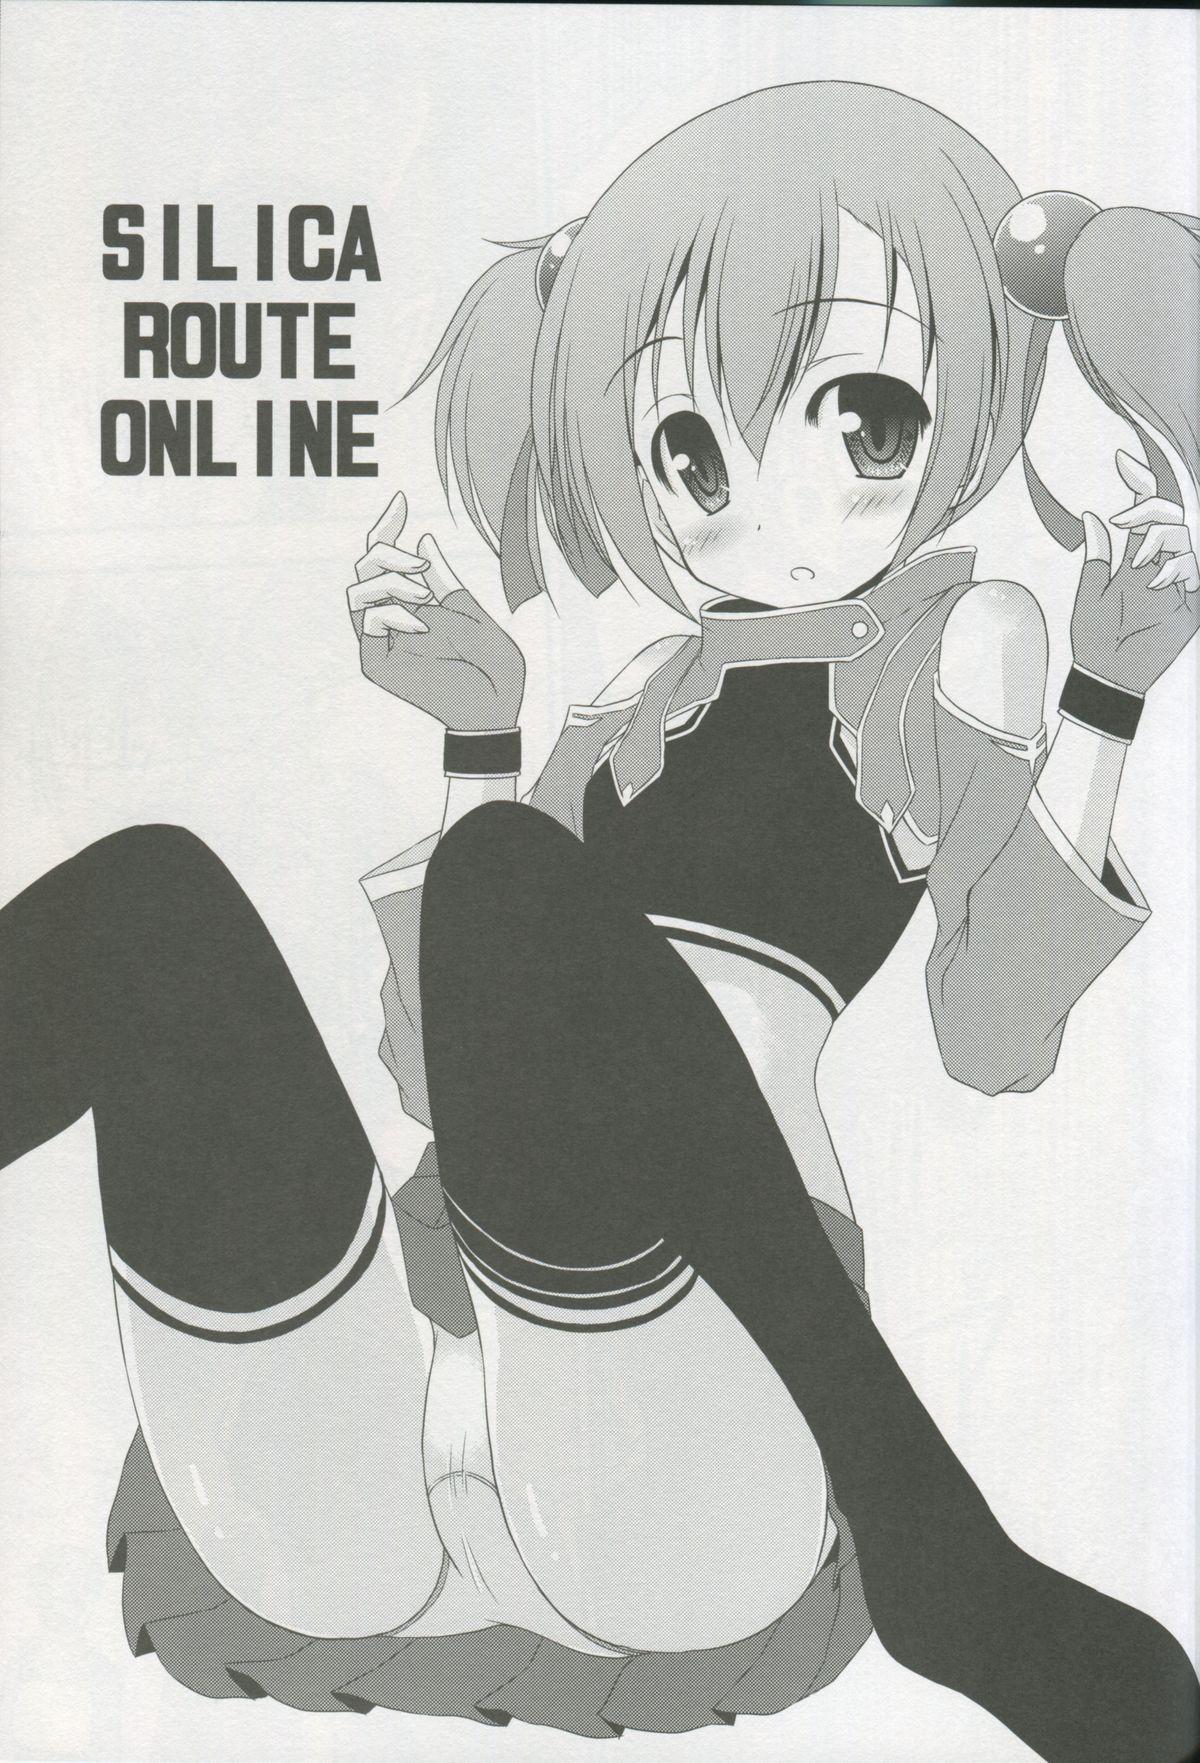 Chudai Silica Route Online - Sword art online Double Blowjob - Page 2